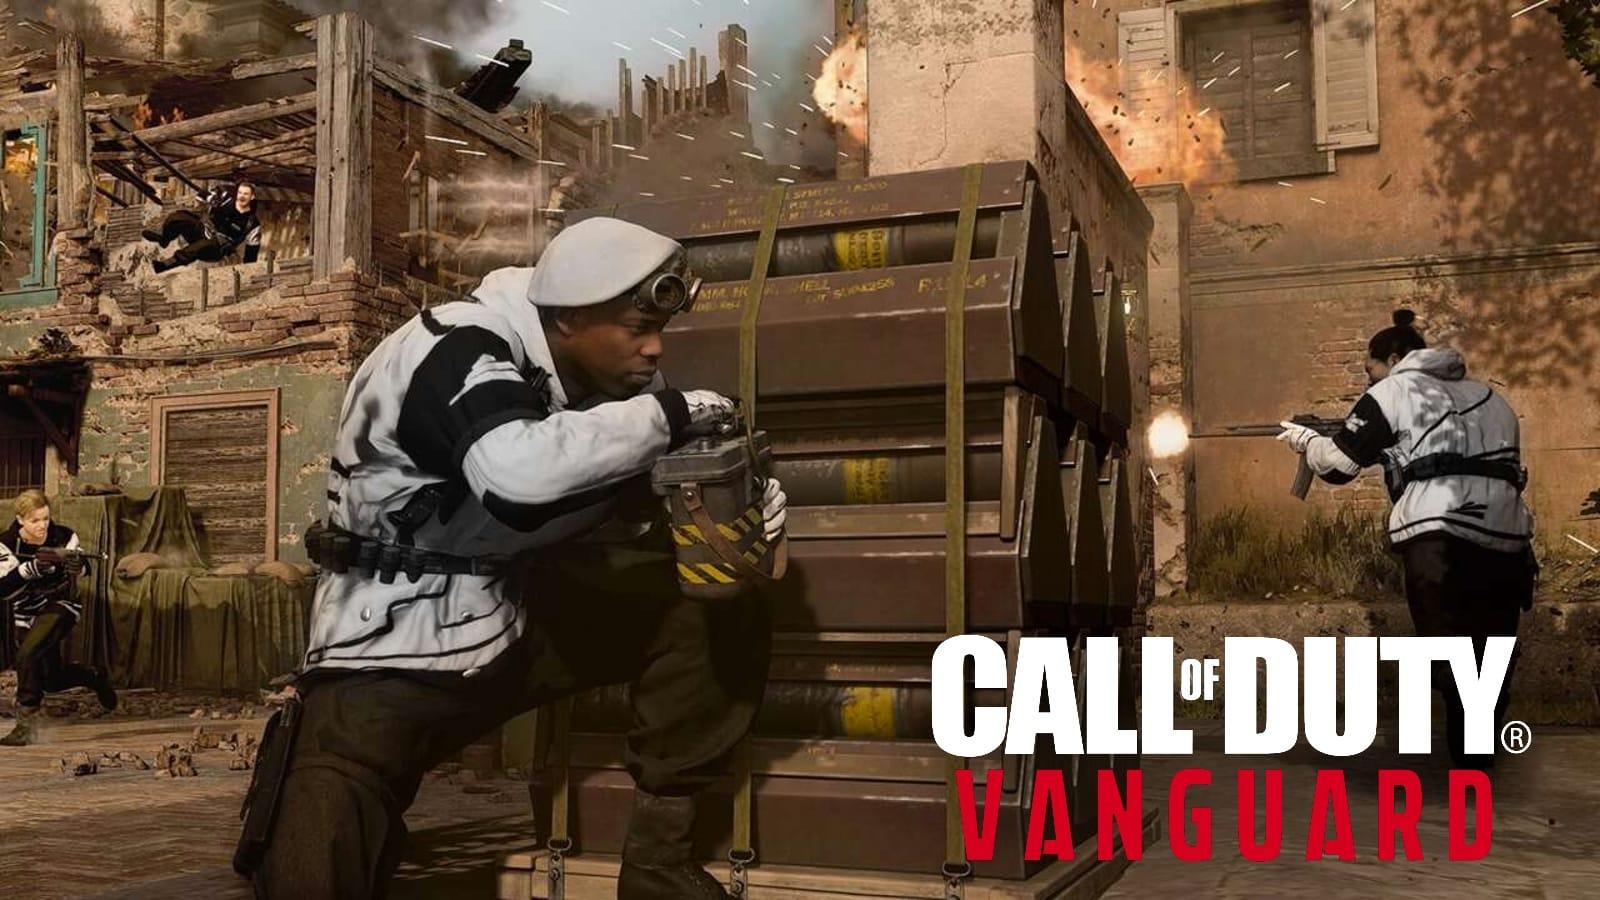 CALL OF DUTY: VANGUARD' HAS HILARIOUS 'PRESS F TO PAY RESPECTS